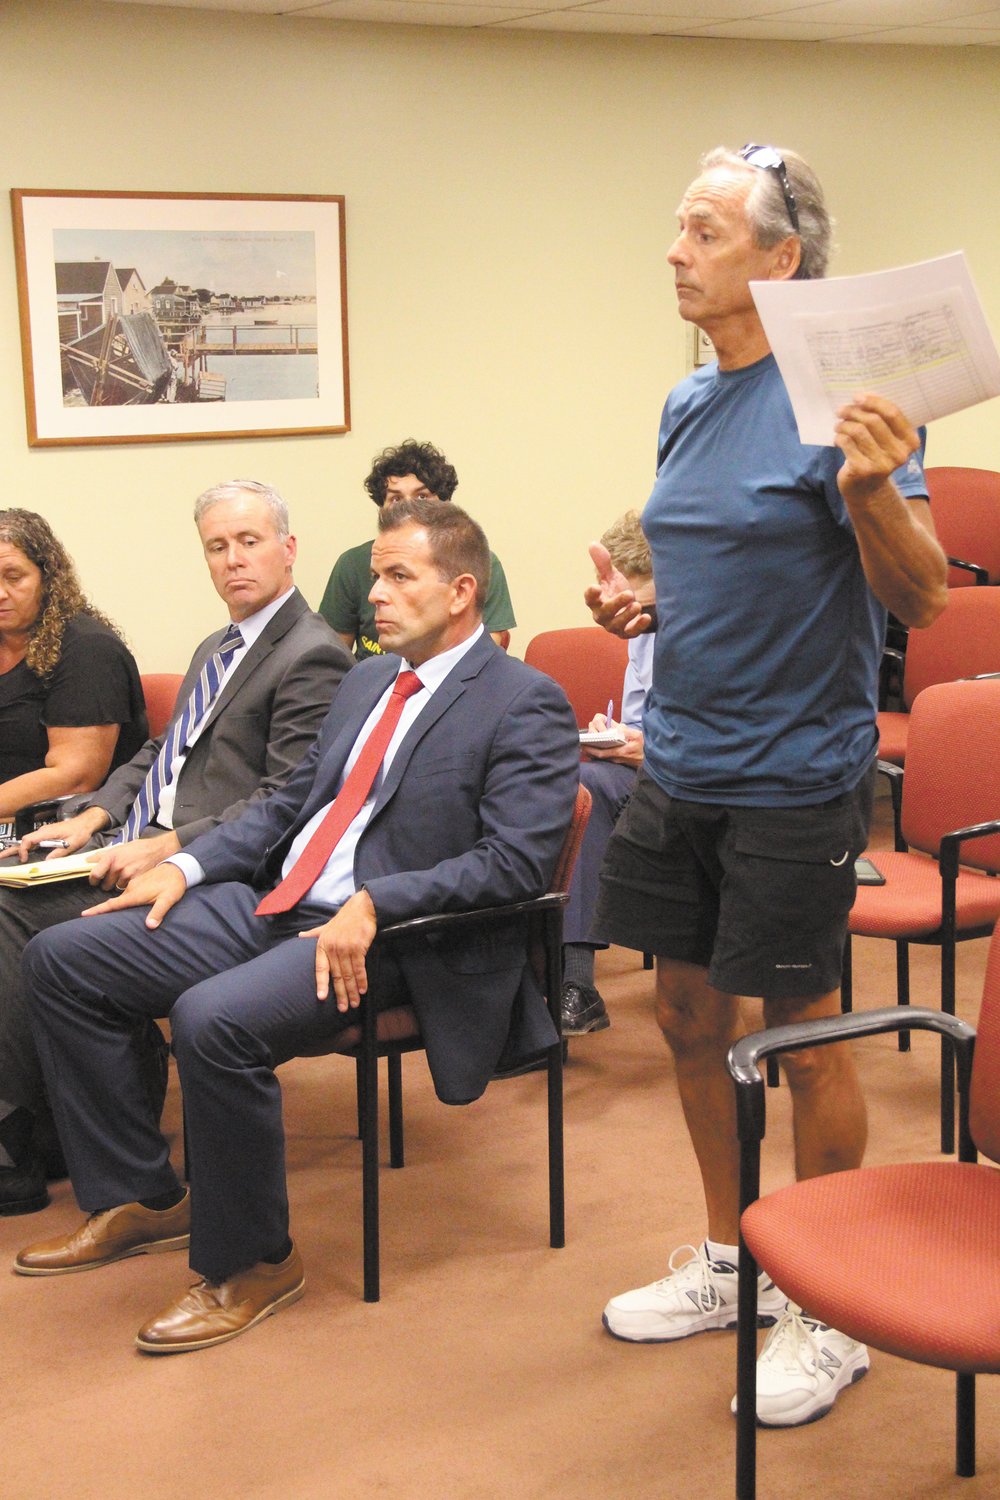 MAKING HIS CASE: Rob Cote addresses the Warwick Board of Canvassers as Senate District 29 Democratic candidate Michael Carreiro (second from left) and his attorney Christopher Friel listen. (Beacon photos)